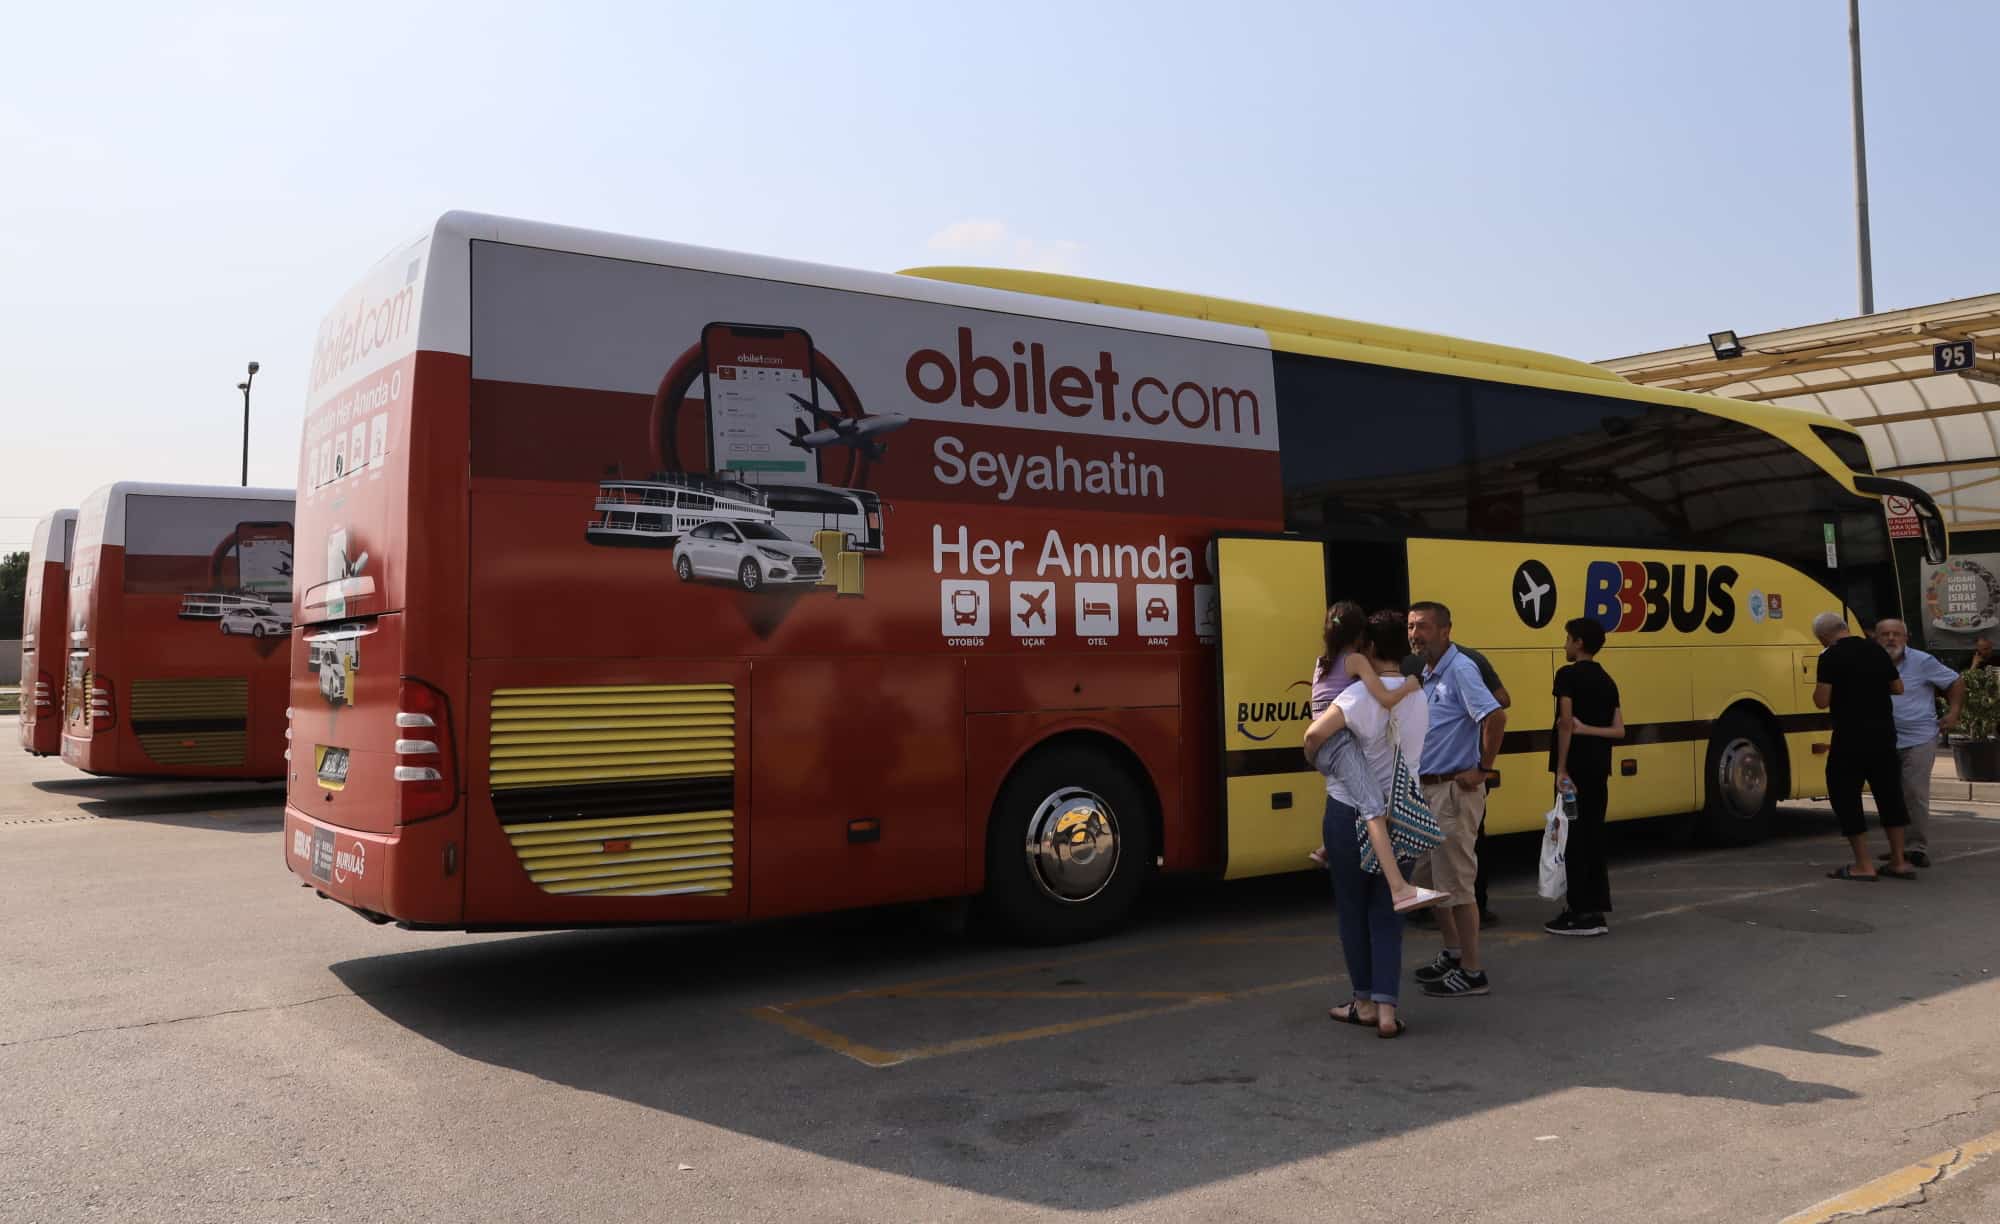 BURSA – Providing uninterrupted transportation of Bursa residents to Istanbul and Sabiha Gökçen airports, the Metropolitan Municipality has included Gemlik, Orhangazi and Yalova on its BBBUS route. Follow the highway before and directly